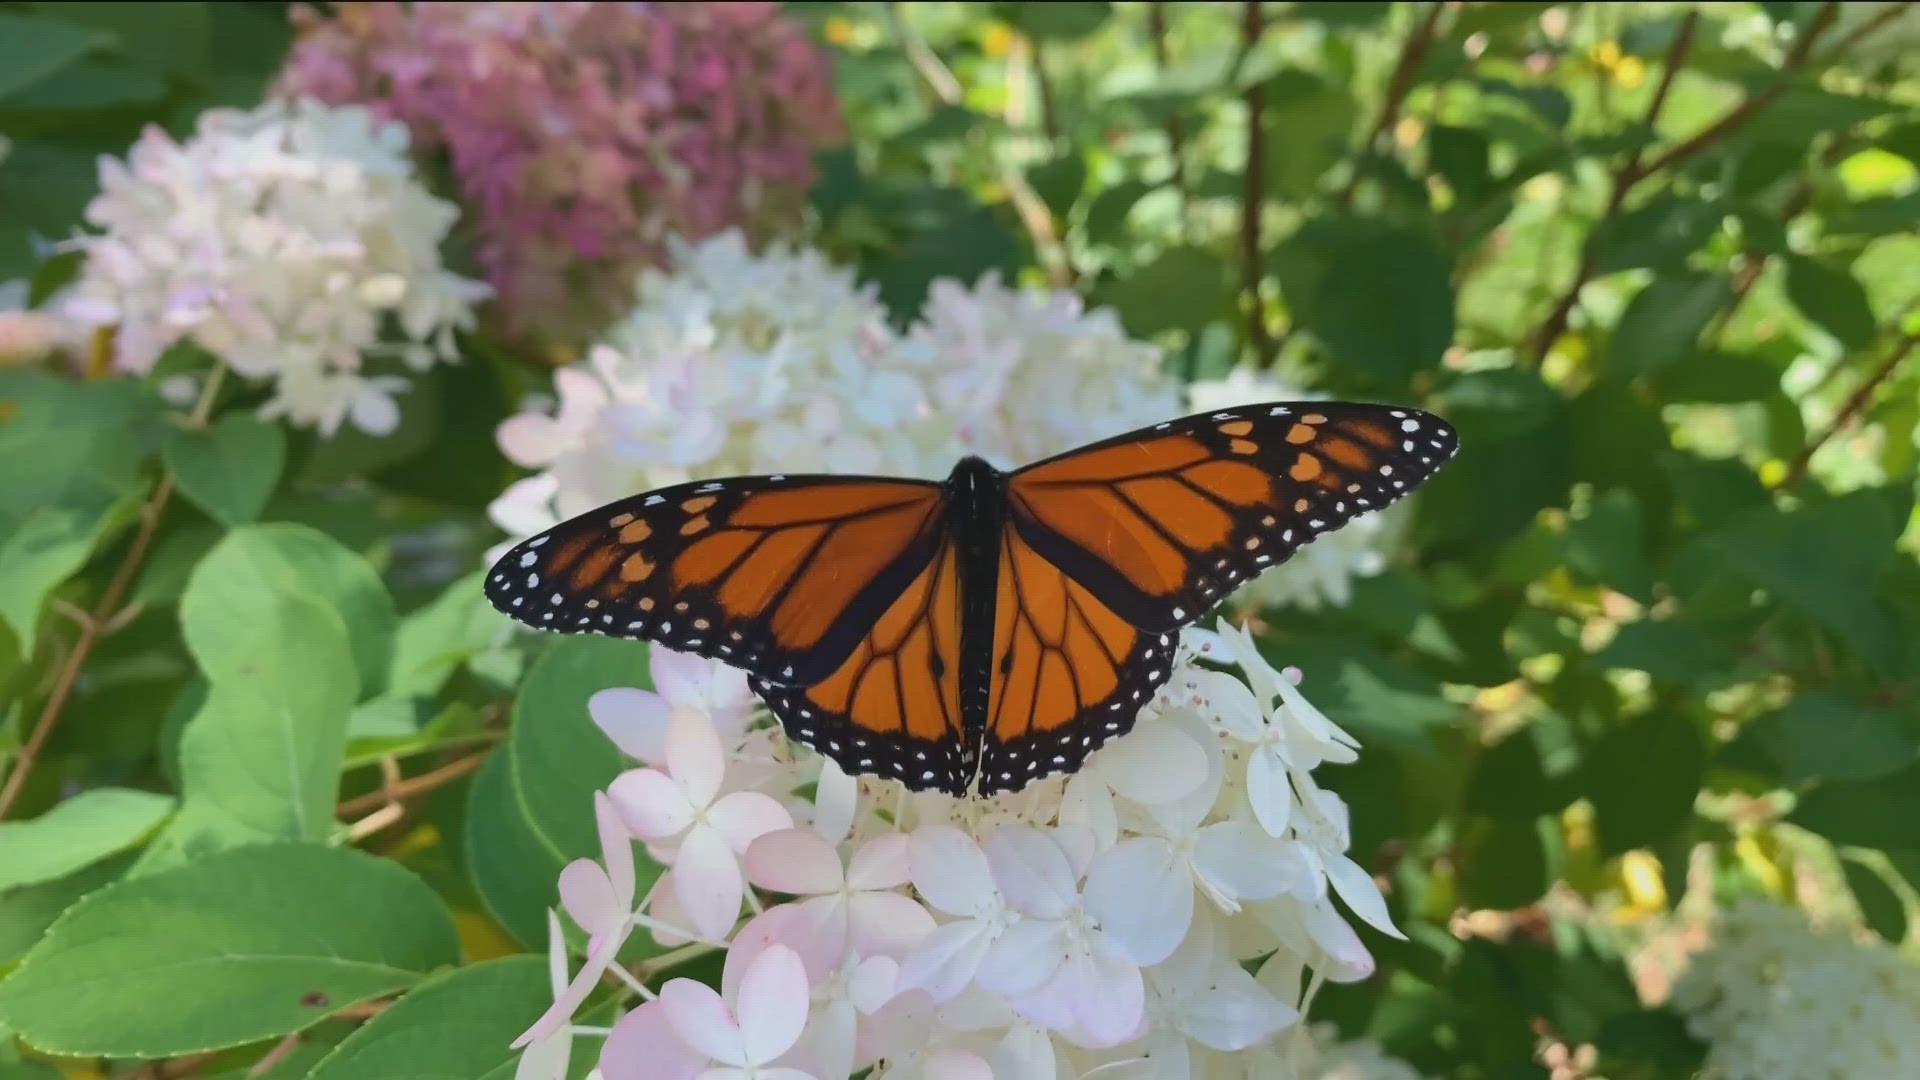 Conservation scientists at a news conference in Mexico City explained reasons for the decline and discussed efforts to help save the Eastern monarch butterflies.